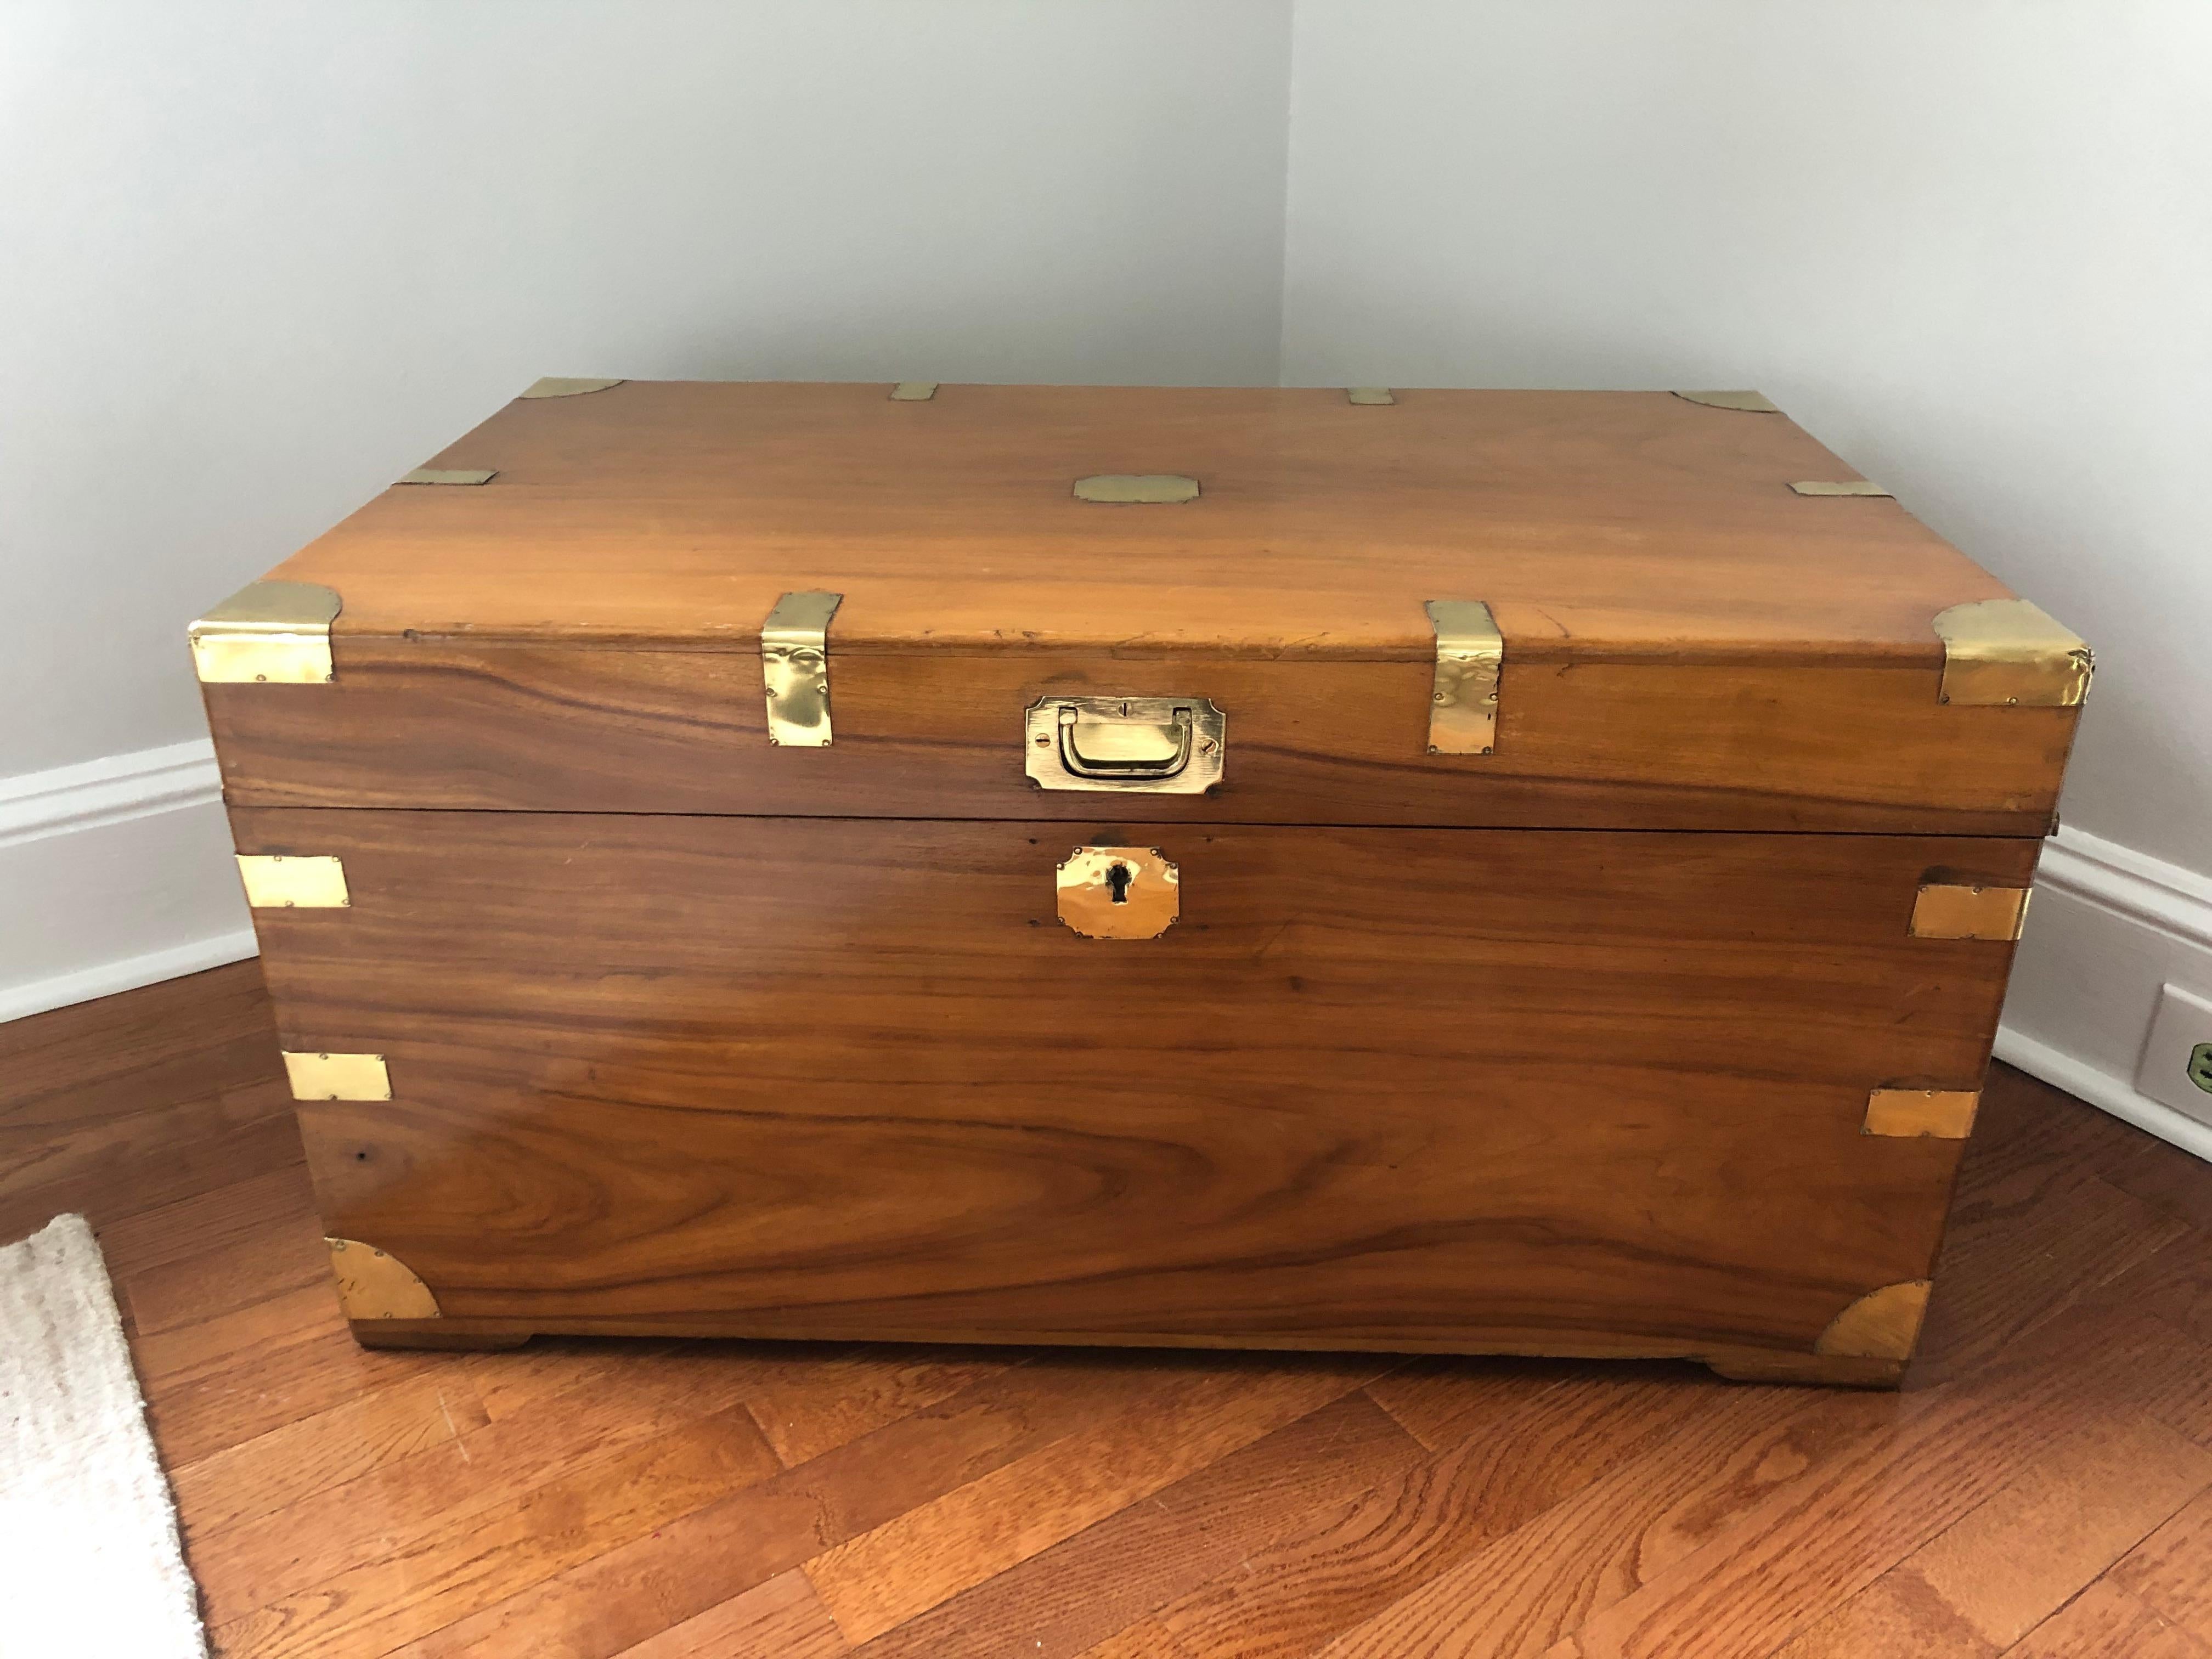 English Character Rich Campaign Trunk with Original Brass and Camphor Interior